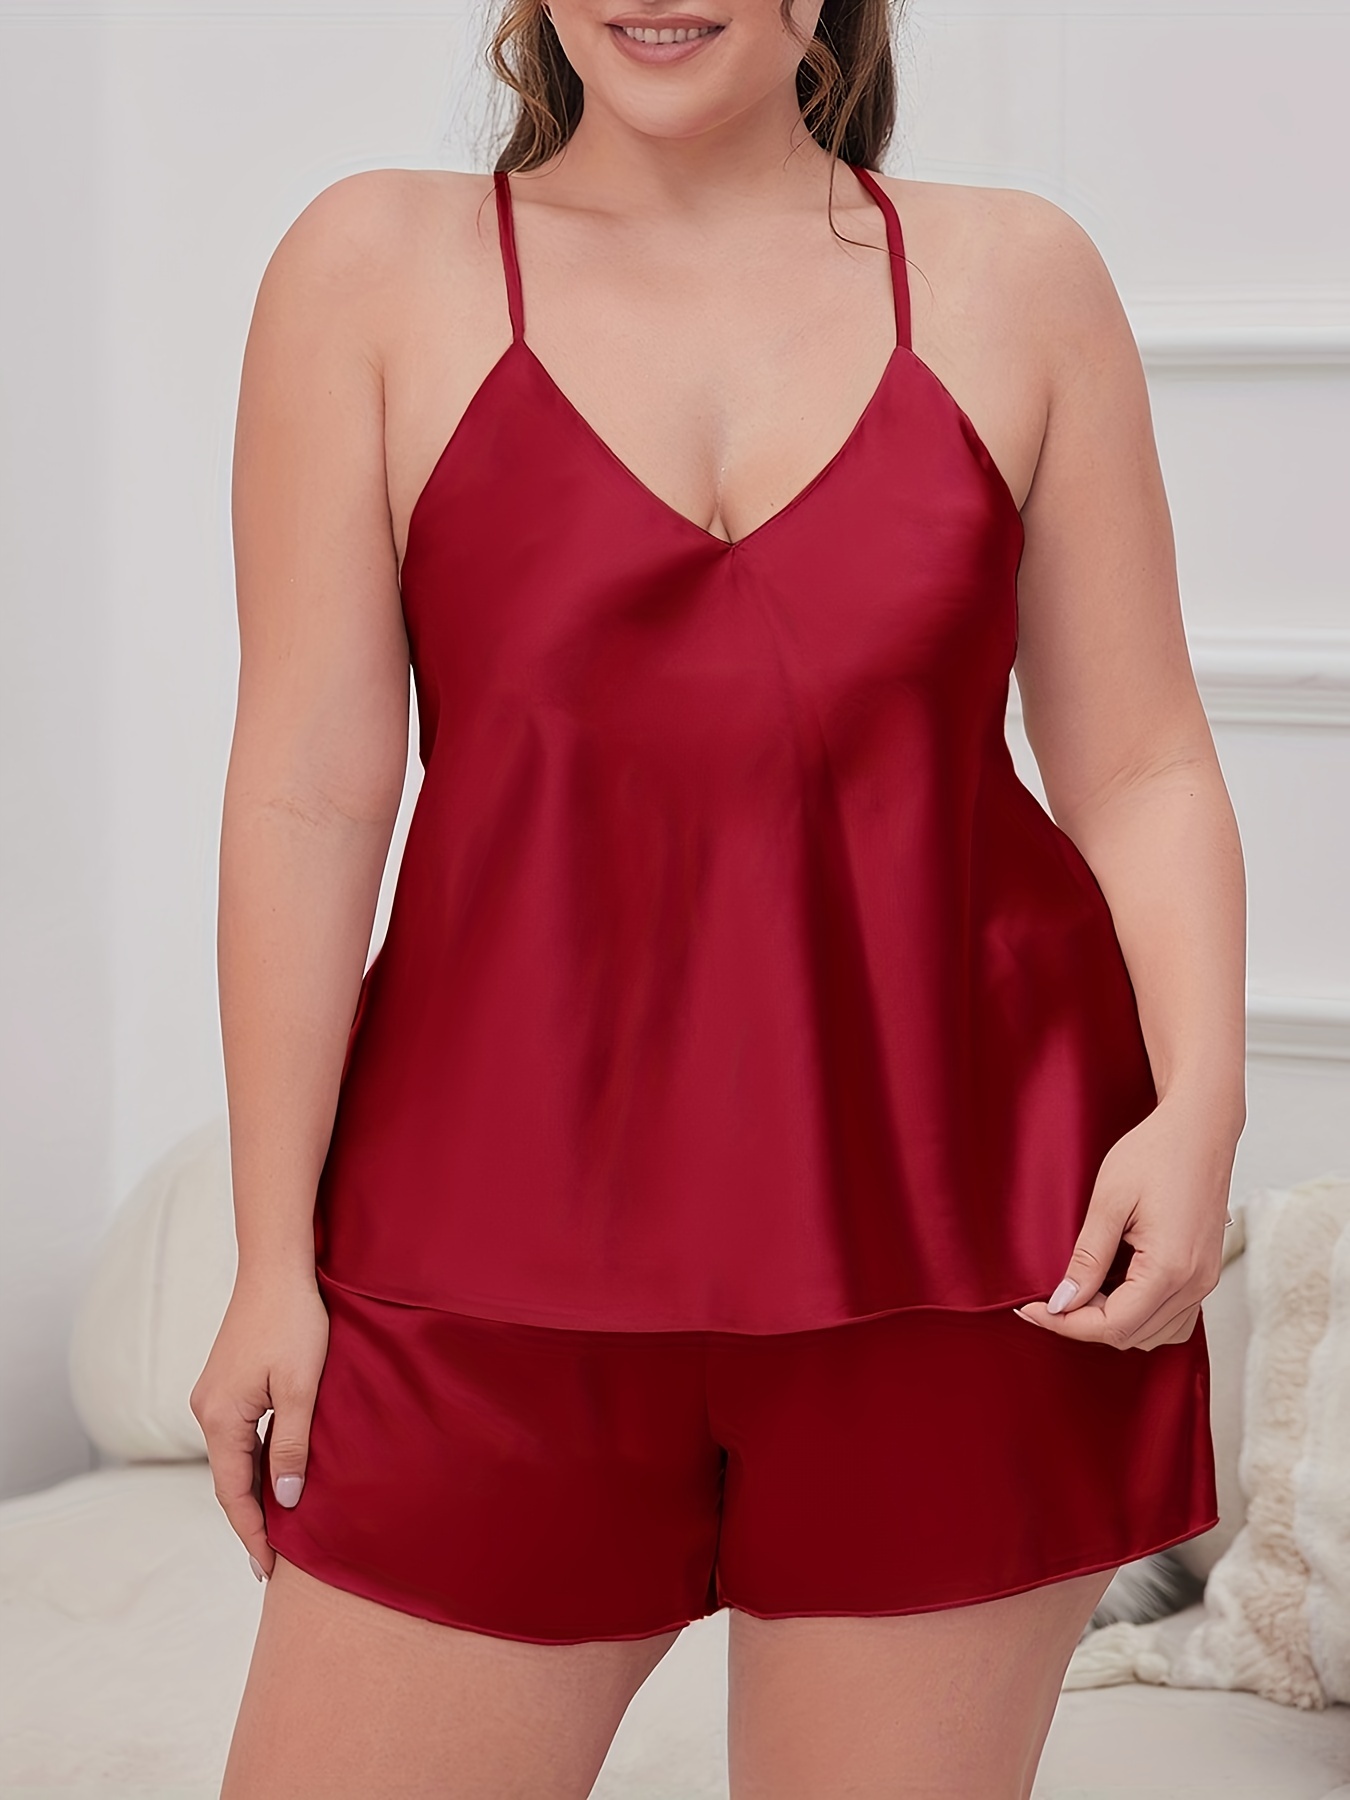 Women's Plus Size Silk Cami Top and Shorts Set, Snazzyway